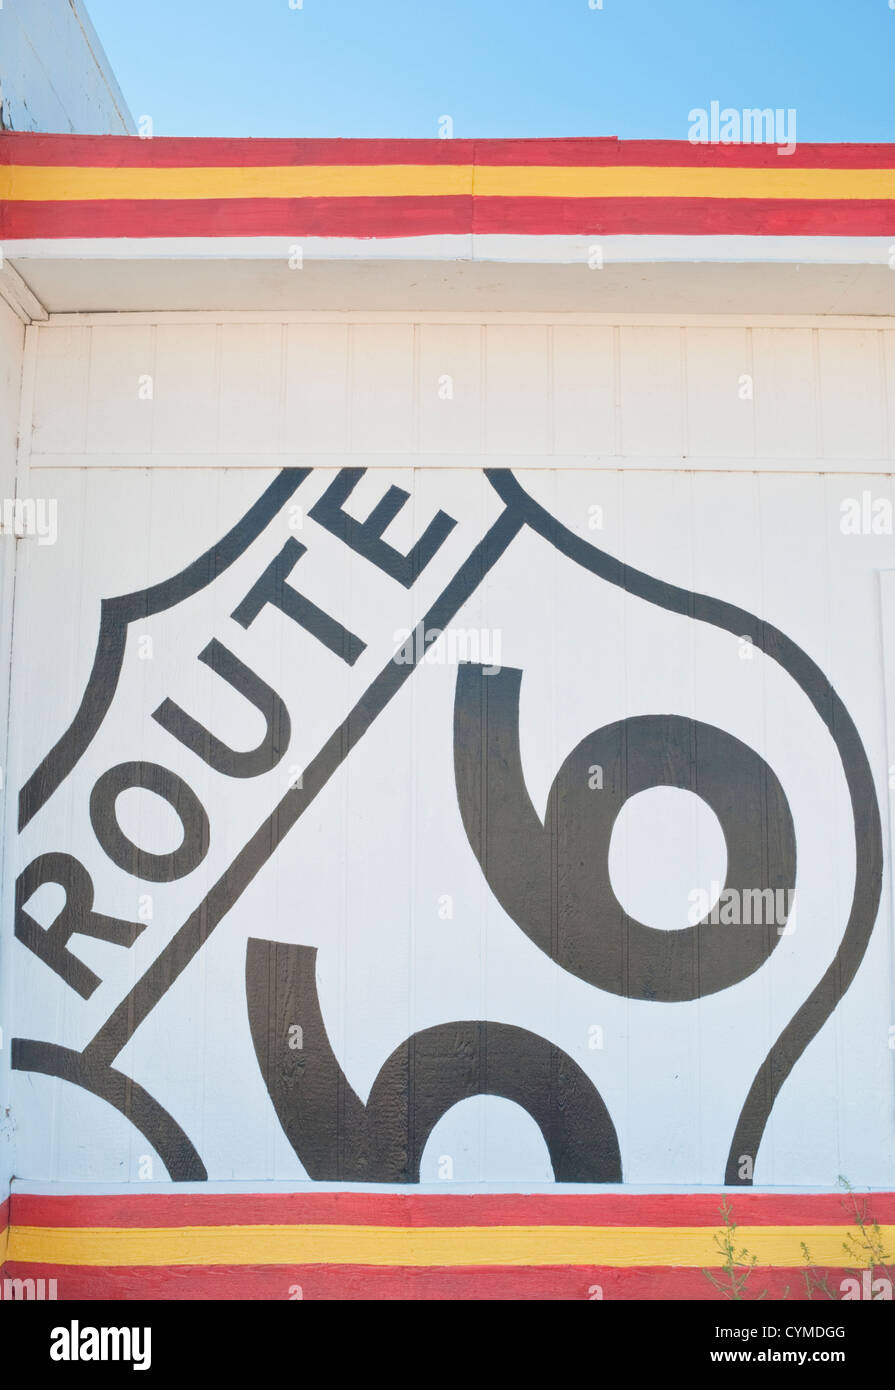 The image of 'Route 66' can be seen painted everywhere in Tucumcari, New Mexico. Stock Photo